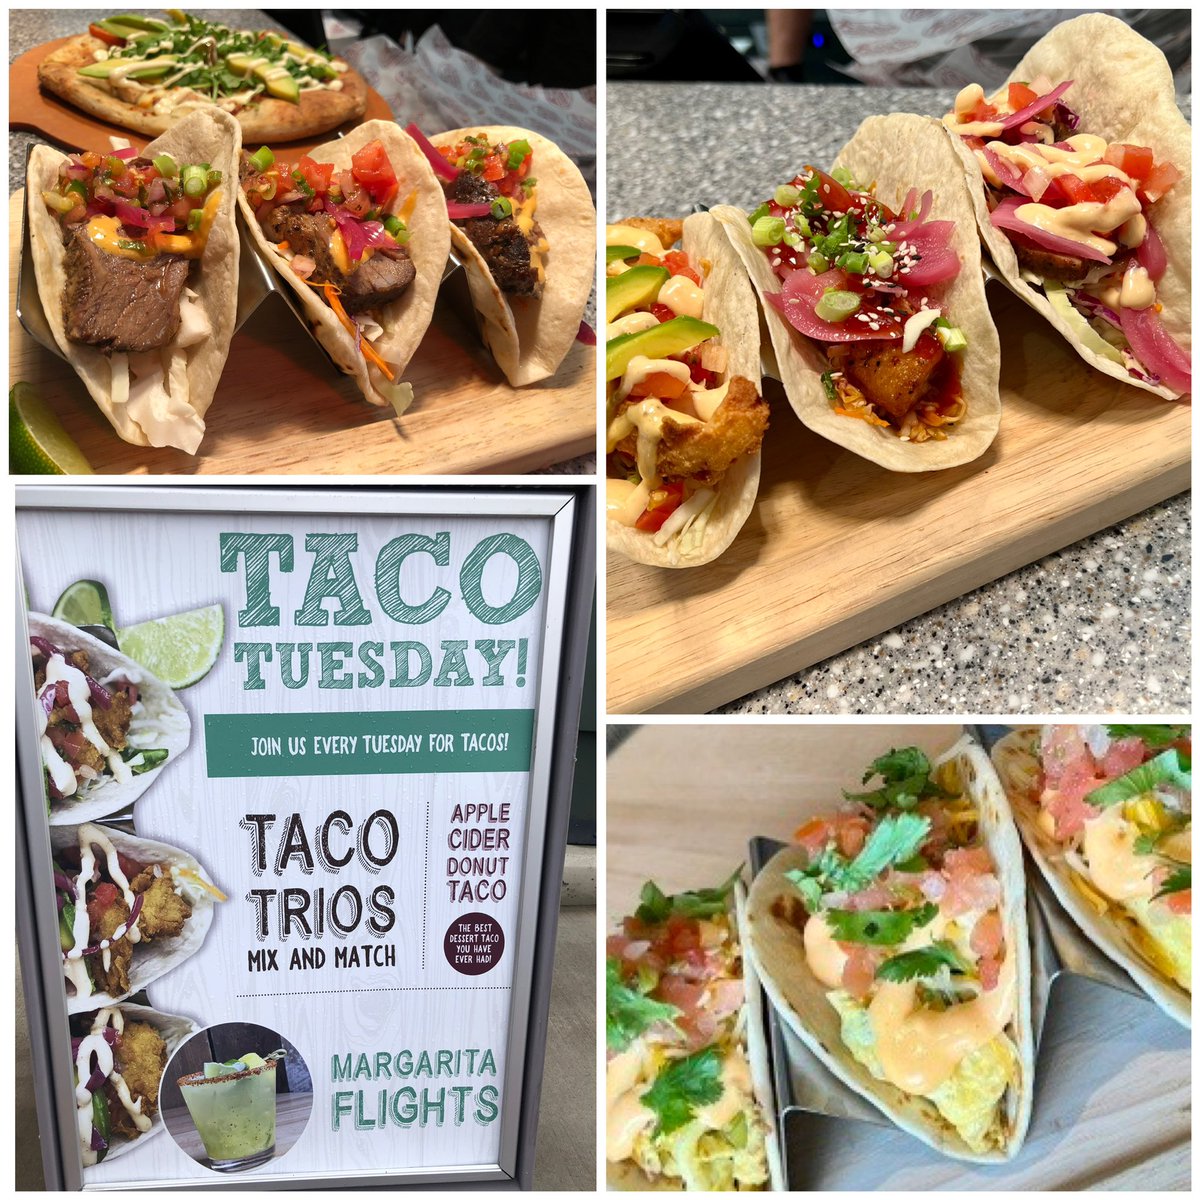 Is it Tuesday yet at the CMan Roadside at the Millyard? #TacoTuesday #Tacos #mht #nh